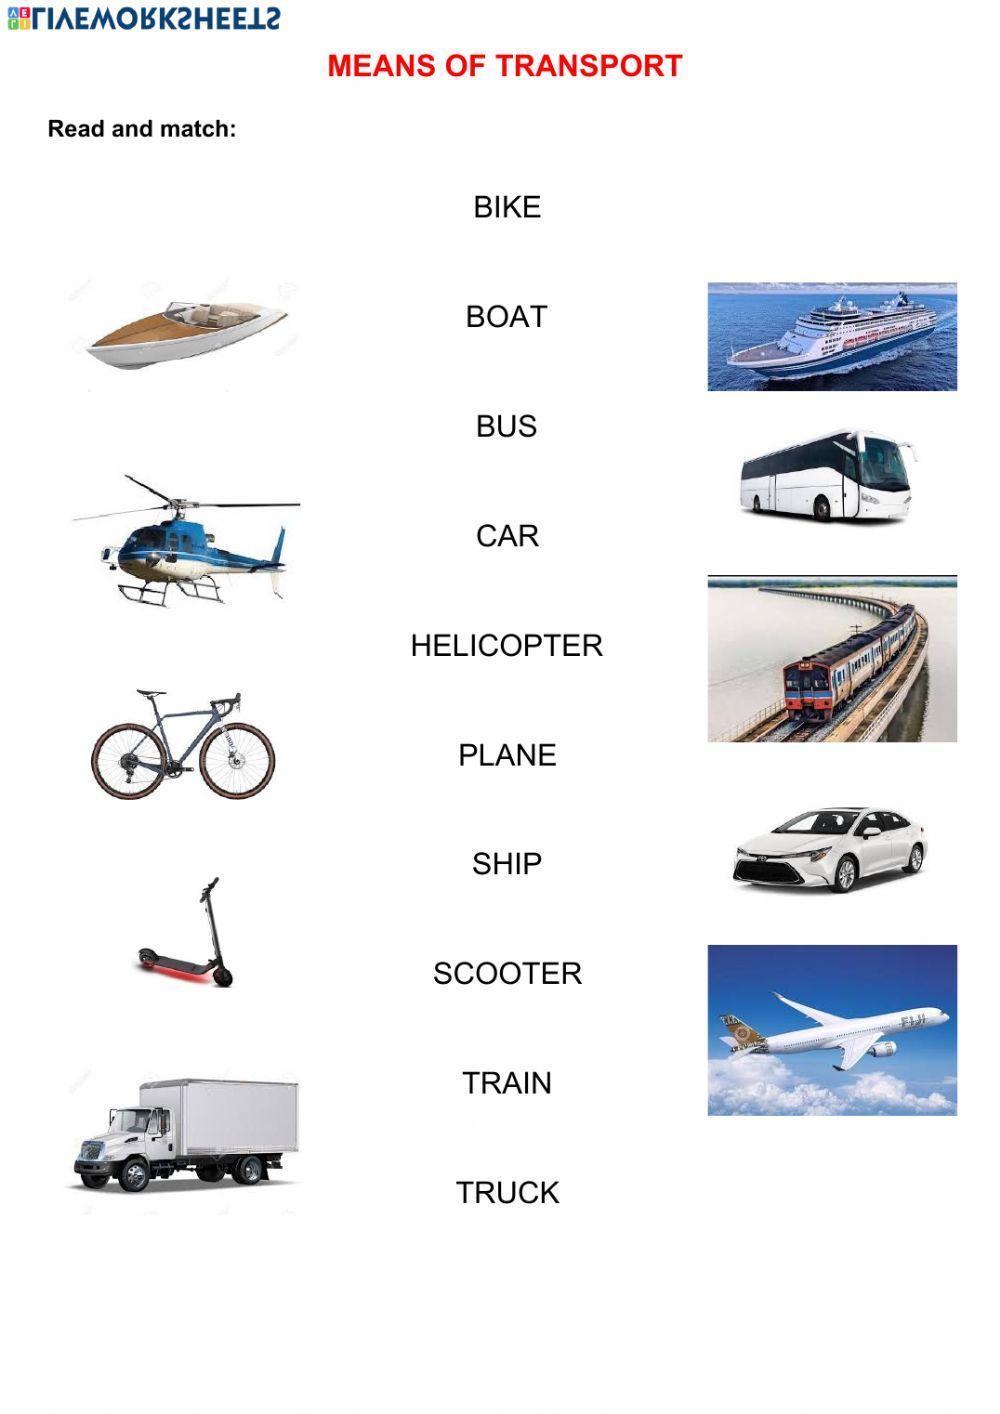 Means of transport-Read and match